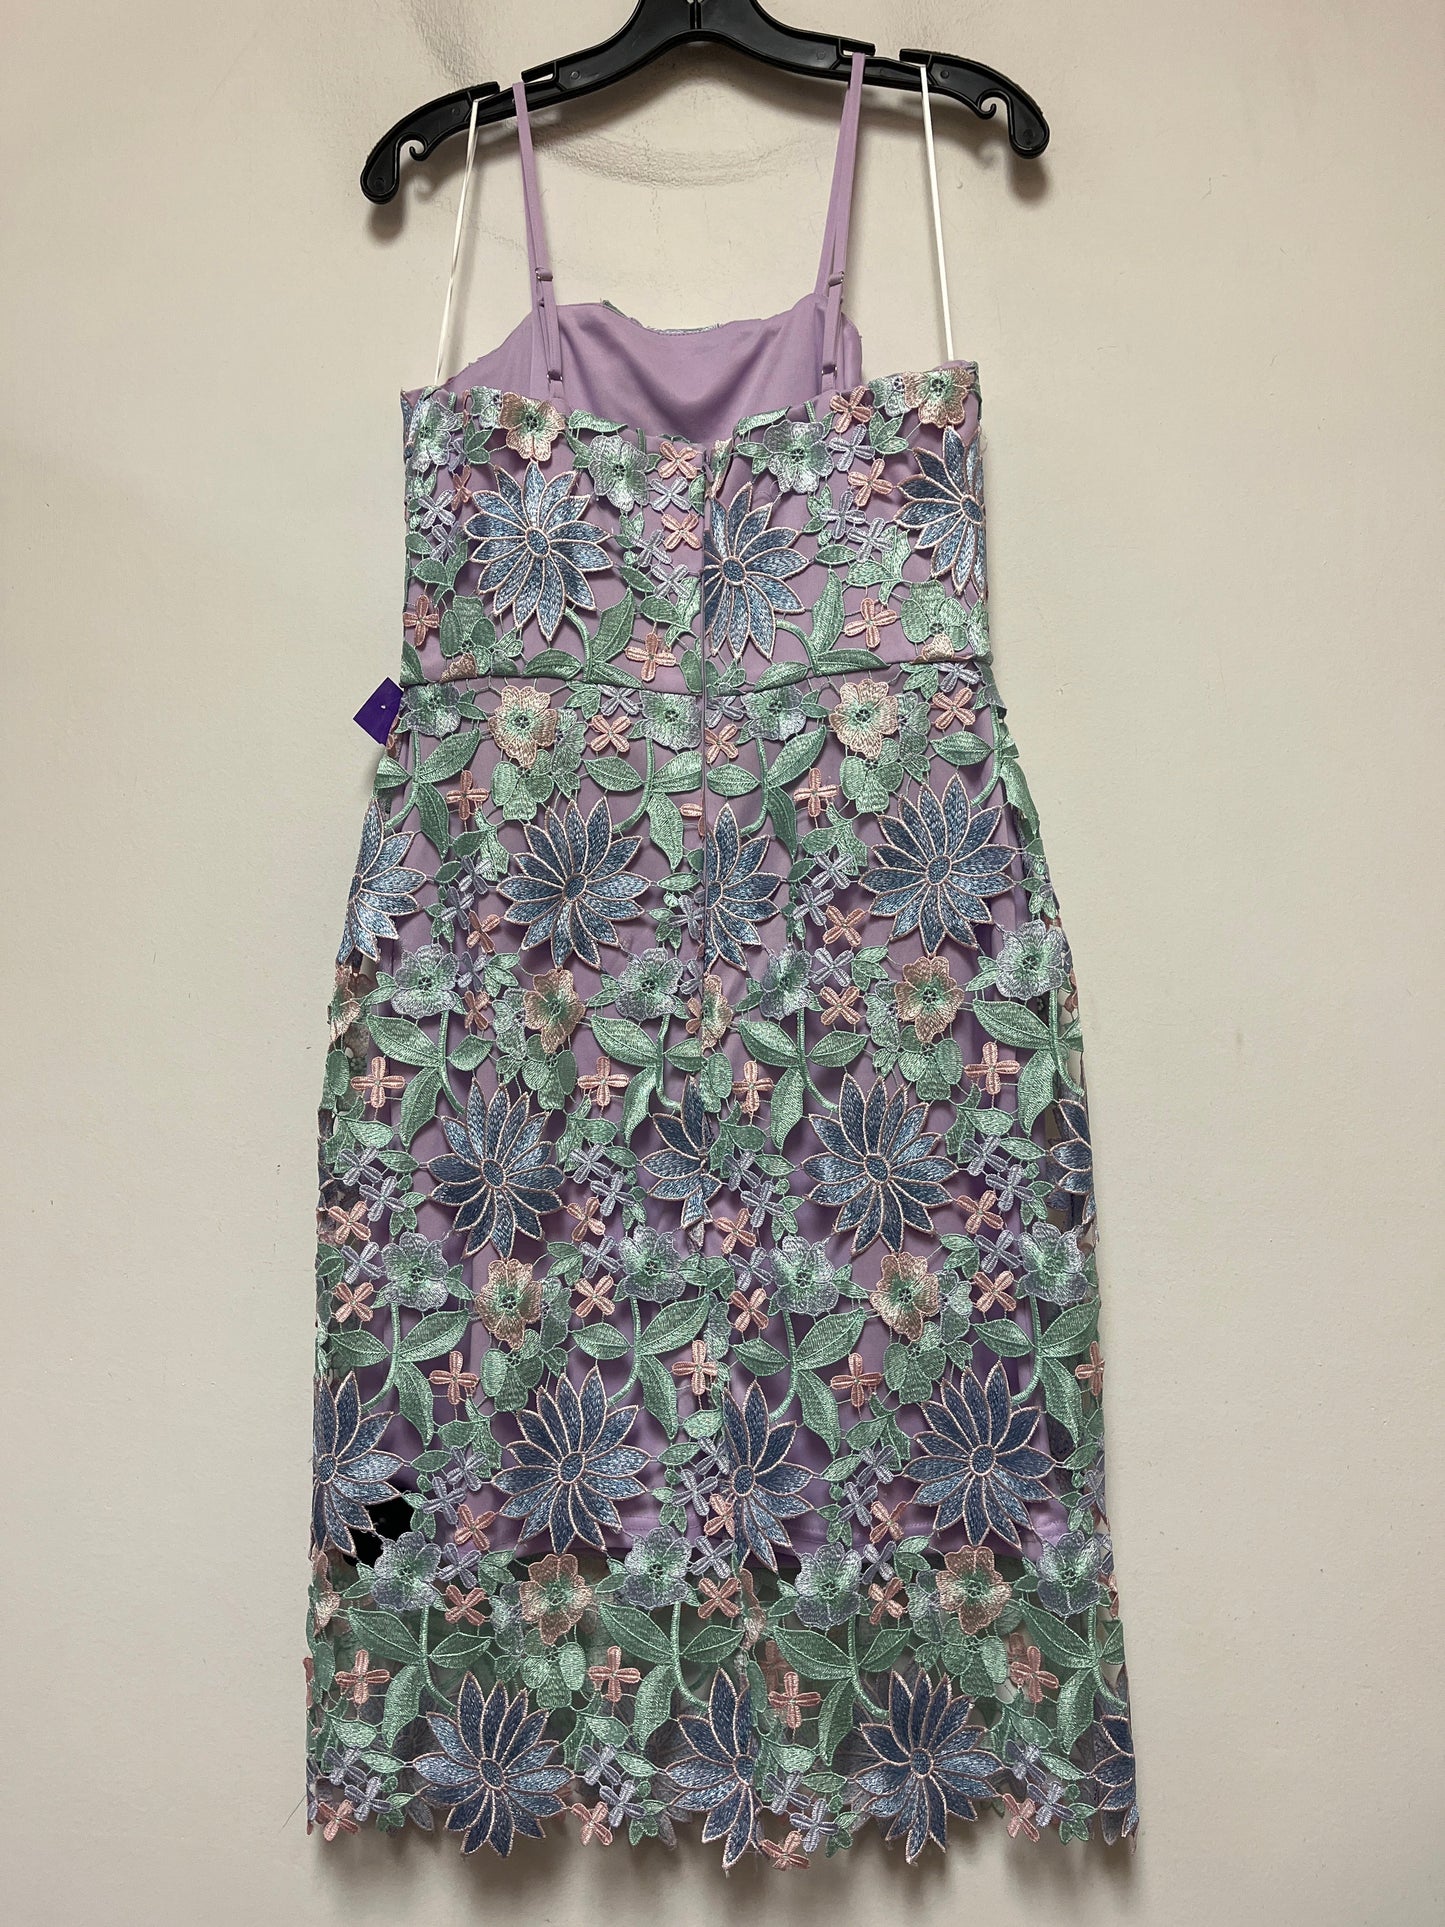 Floral Print Dress Casual Short Shein, Size M